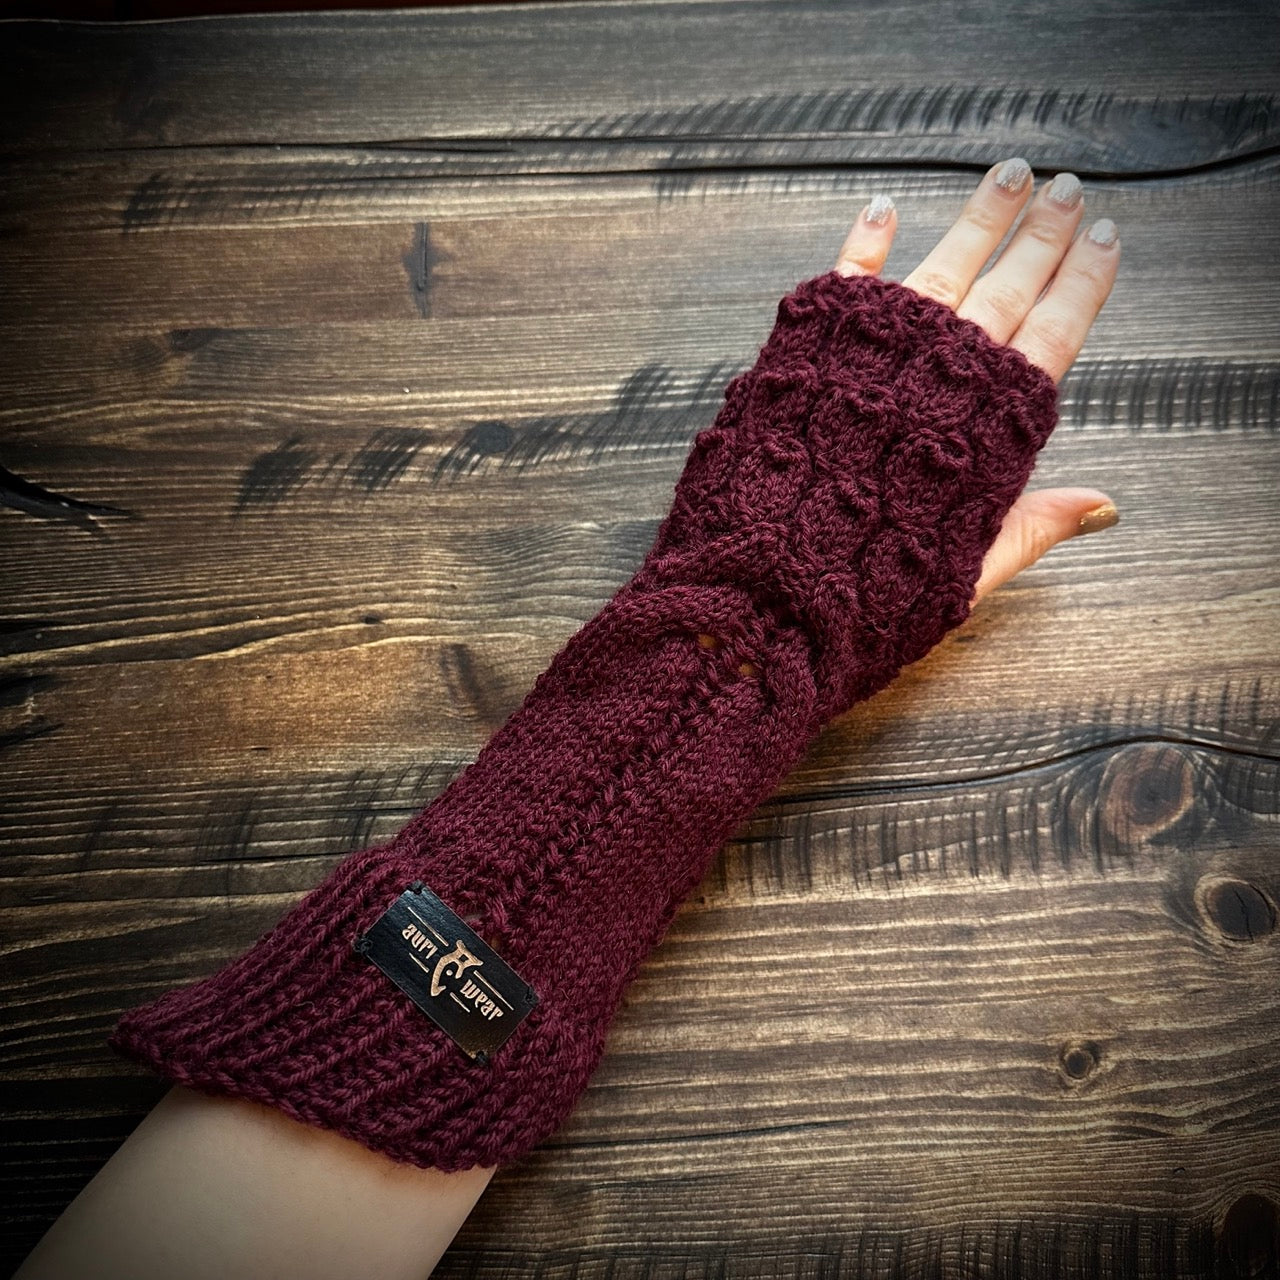 Handmade knitted mulled wine arm warmers